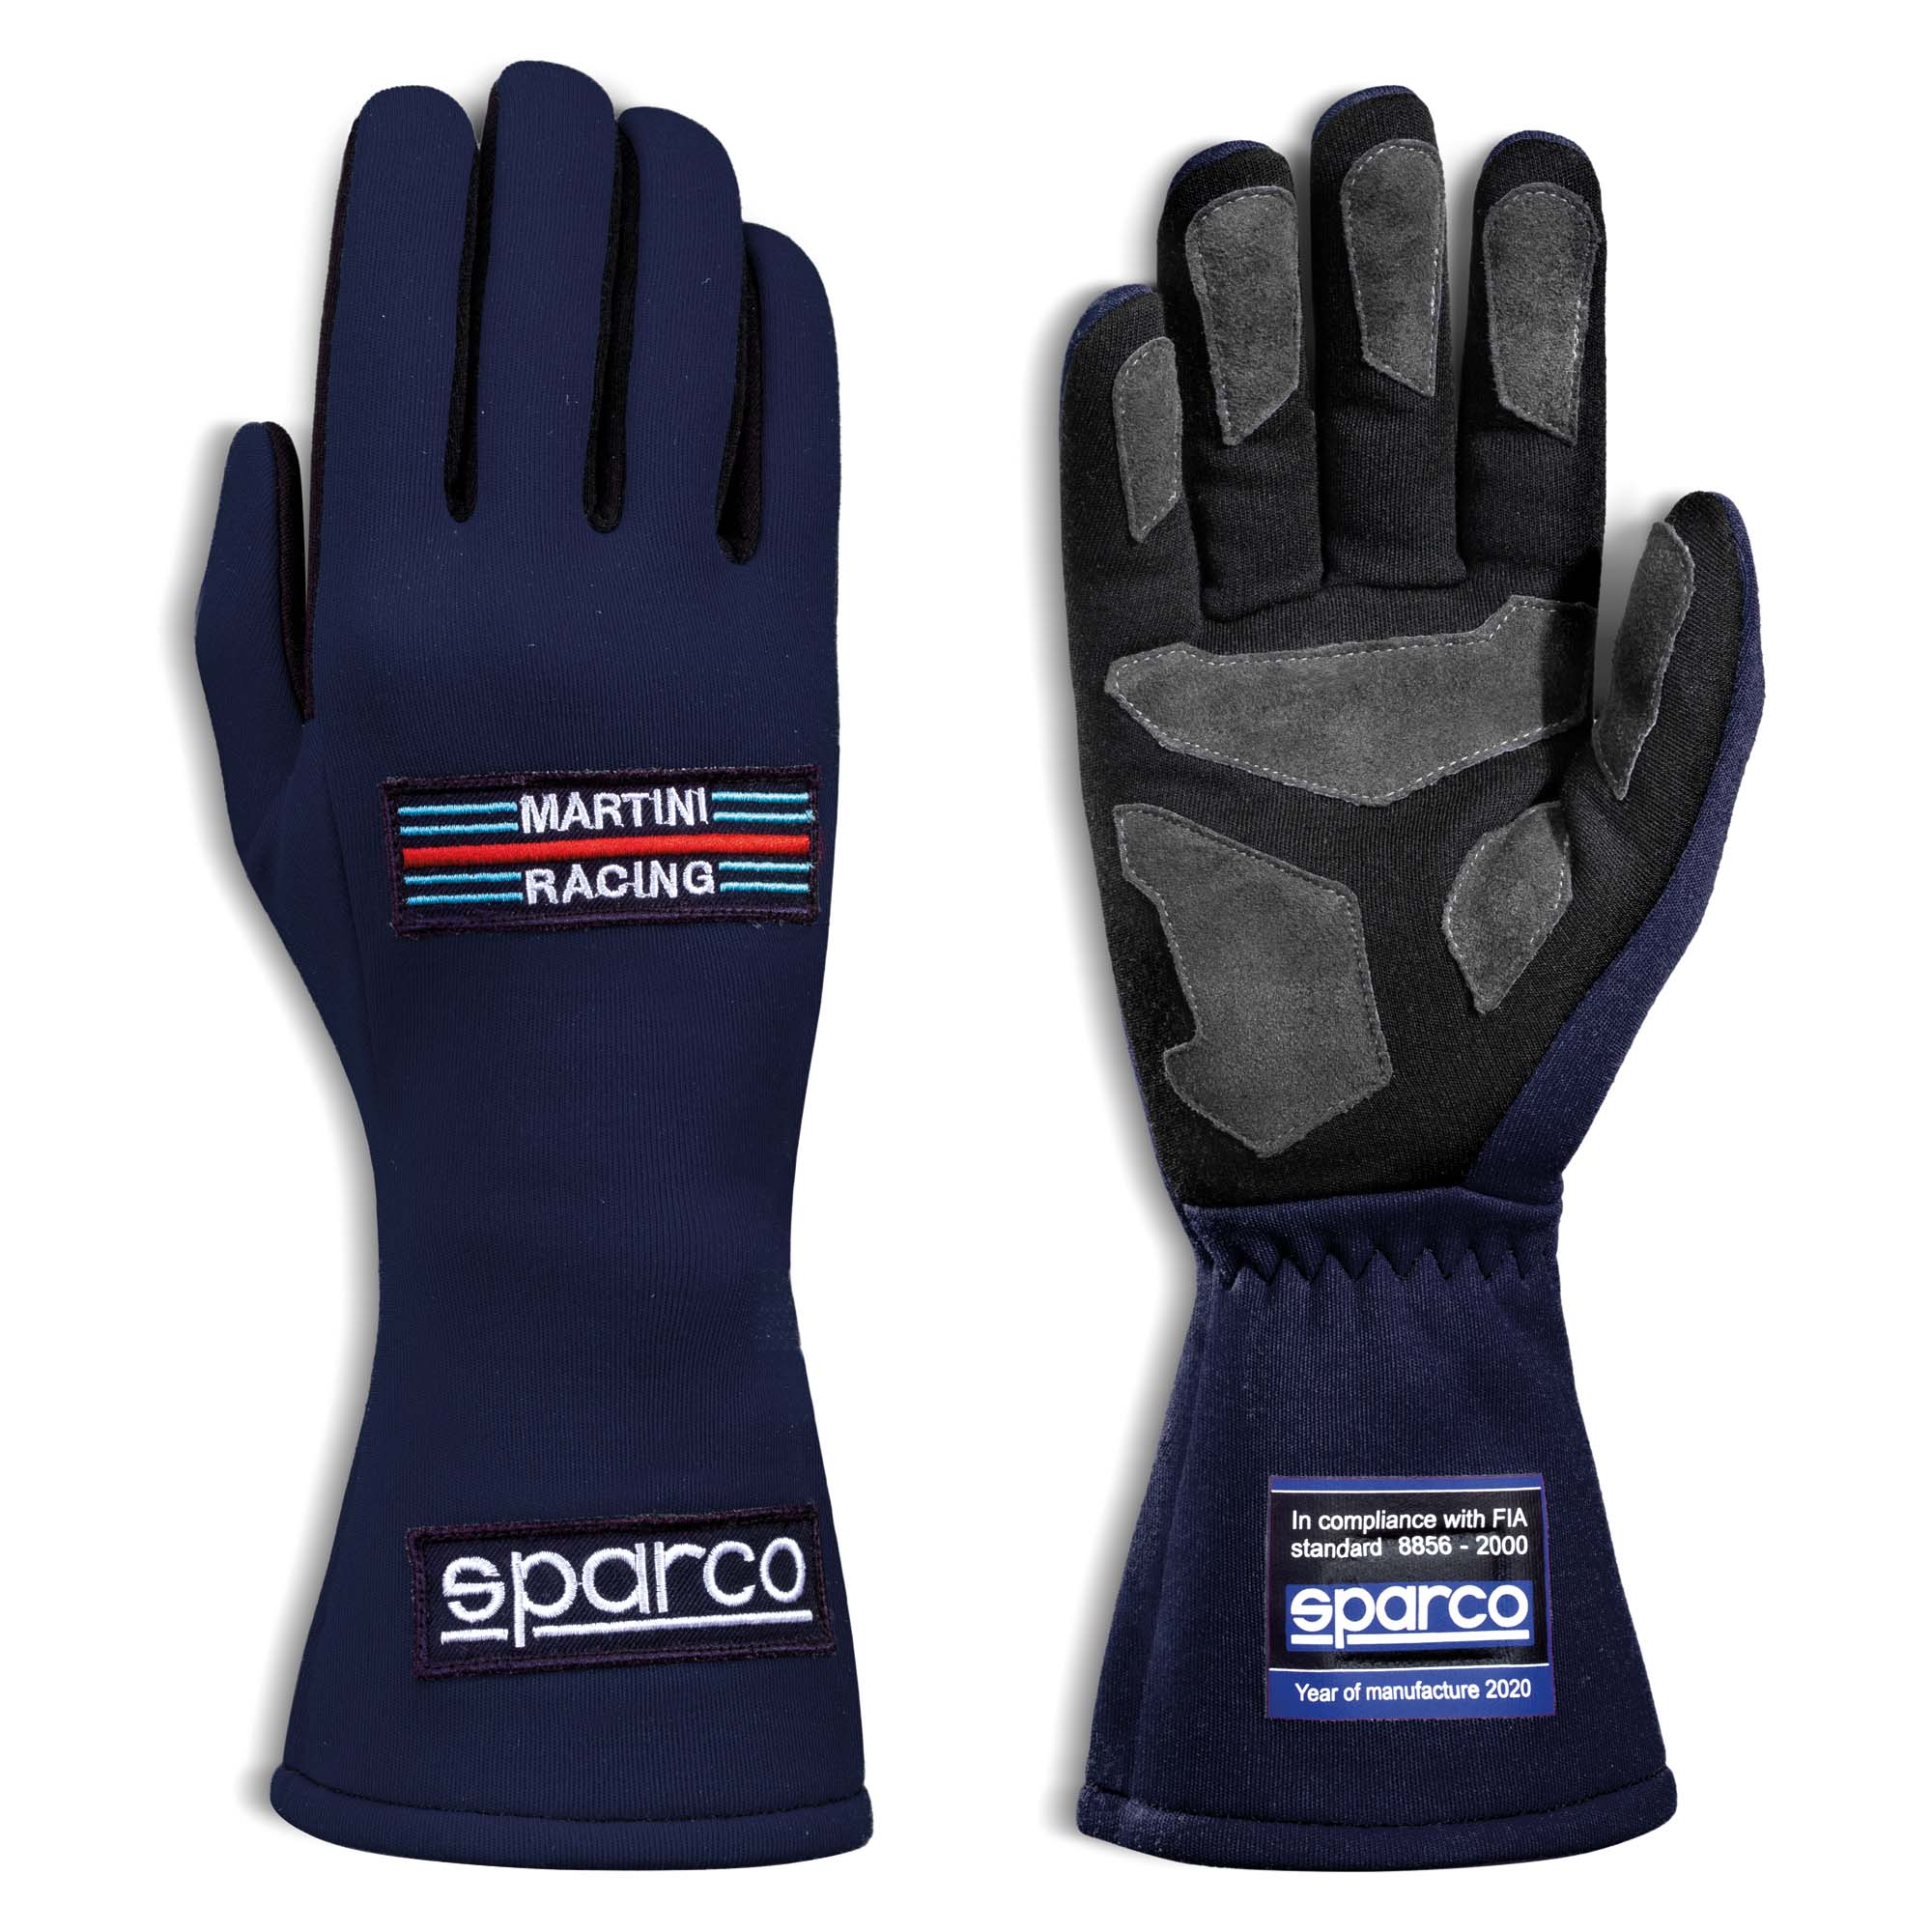 Sparco Martini Land Racing Gloves